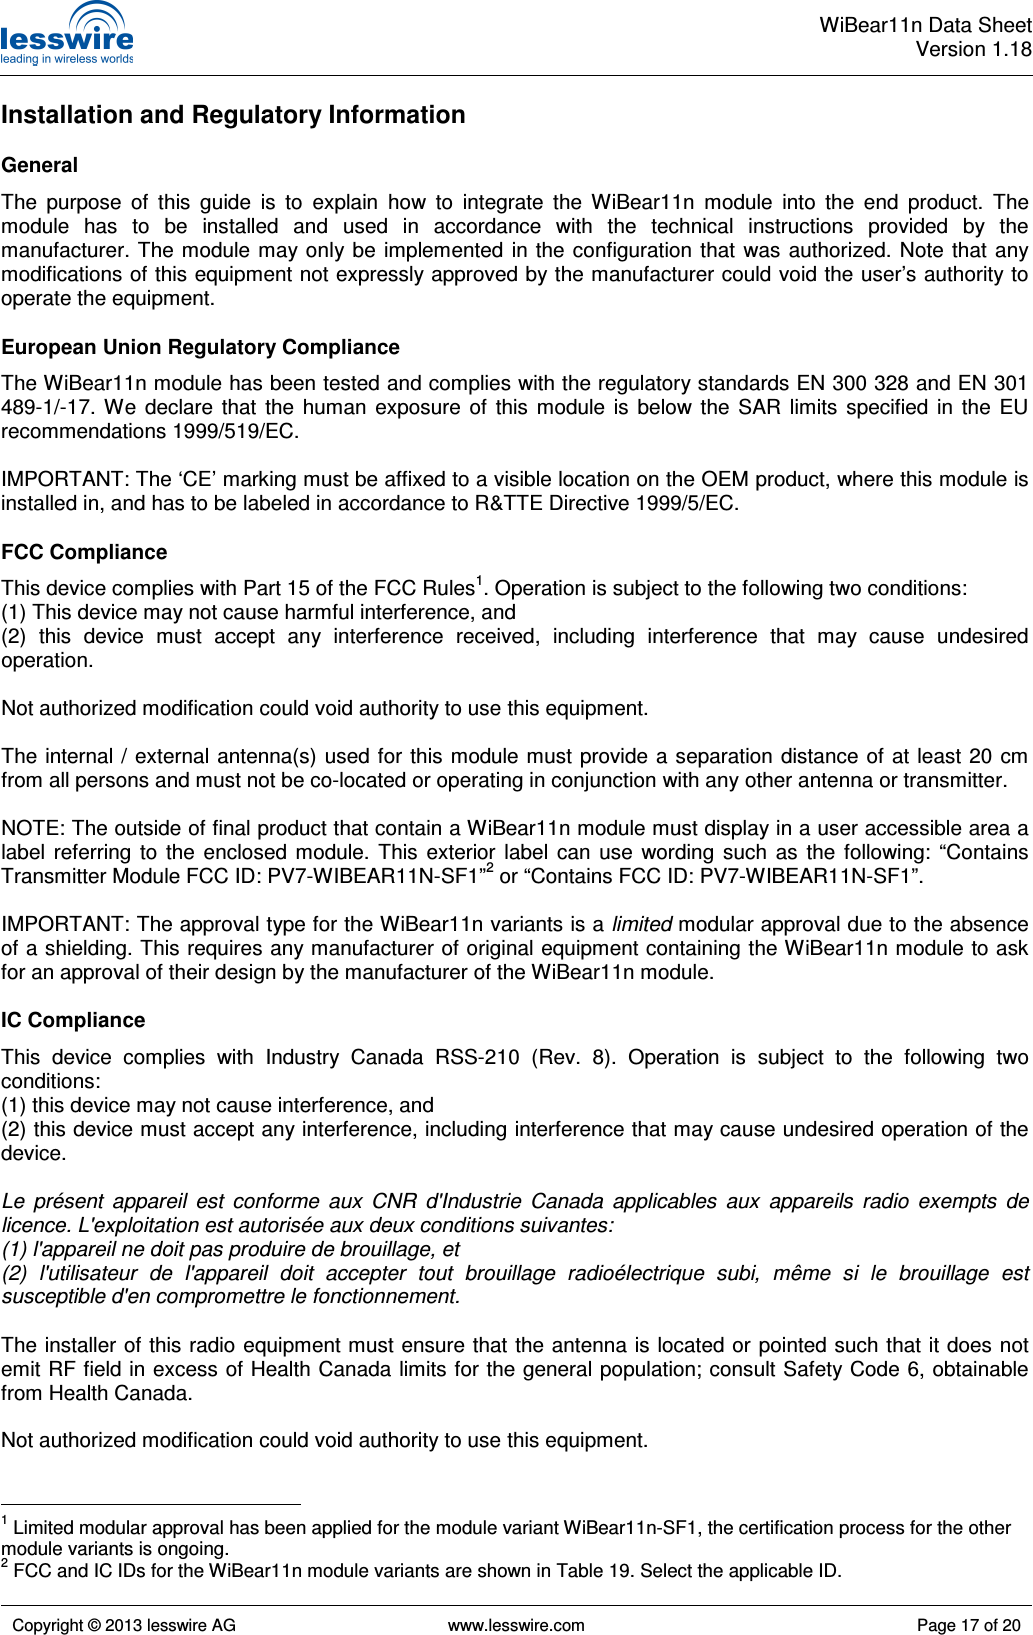  WiBear11n Data SheetVersion 1.18   Copyright © 2013 lesswire AG   www.lesswire.com  Page 17 of 20  Installation and Regulatory Information General The  purpose  of  this  guide  is  to  explain  how  to  integrate  the  WiBear11n  module  into  the  end  product.  The module  has  to  be  installed  and  used  in  accordance  with  the  technical  instructions  provided  by  the manufacturer. The module may only be  implemented  in  the configuration  that  was authorized. Note that any modifications of this equipment not expressly approved by the manufacturer could void the user’s authority to operate the equipment. European Union Regulatory Compliance The WiBear11n module has been tested and complies with the regulatory standards EN 300 328 and EN 301 489-1/-17.  We  declare  that  the  human  exposure  of  this  module  is  below  the  SAR  limits  specified  in  the  EU recommendations 1999/519/EC.  IMPORTANT: The ‘CE’ marking must be affixed to a visible location on the OEM product, where this module is installed in, and has to be labeled in accordance to R&amp;TTE Directive 1999/5/EC. FCC Compliance This device complies with Part 15 of the FCC Rules1. Operation is subject to the following two conditions: (1) This device may not cause harmful interference, and (2)  this  device  must  accept  any  interference  received,  including  interference  that  may  cause  undesired operation.  Not authorized modification could void authority to use this equipment.  The  internal / external antenna(s) used  for  this module must  provide a separation  distance  of at  least 20  cm from all persons and must not be co-located or operating in conjunction with any other antenna or transmitter.  NOTE: The outside of final product that contain a WiBear11n module must display in a user accessible area a label  referring  to  the  enclosed  module.  This  exterior  label  can  use  wording  such  as  the  following:  “Contains Transmitter Module FCC ID: PV7-WIBEAR11N-SF1”2 or “Contains FCC ID: PV7-WIBEAR11N-SF1”.  IMPORTANT: The approval type for the WiBear11n variants is a limited modular approval due to the absence of a shielding. This requires any manufacturer of original equipment containing the WiBear11n module to ask for an approval of their design by the manufacturer of the WiBear11n module. IC Compliance This  device  complies  with  Industry  Canada  RSS-210  (Rev.  8).  Operation  is  subject  to  the  following  two conditions: (1) this device may not cause interference, and (2) this device must accept any interference, including interference that may cause undesired operation of the device.  Le  présent  appareil  est  conforme  aux  CNR  d&apos;Industrie  Canada  applicables  aux  appareils  radio  exempts  de licence. L&apos;exploitation est autorisée aux deux conditions suivantes: (1) l&apos;appareil ne doit pas produire de brouillage, et (2)  l&apos;utilisateur  de  l&apos;appareil  doit  accepter  tout  brouillage  radioélectrique  subi,  même  si  le  brouillage  est susceptible d&apos;en compromettre le fonctionnement.  The installer of this radio equipment must ensure that the antenna is located or pointed such that it does not emit RF field in excess of Health Canada limits for the general population; consult Safety Code 6, obtainable from Health Canada.  Not authorized modification could void authority to use this equipment.                                                   1 Limited modular approval has been applied for the module variant WiBear11n-SF1, the certification process for the other module variants is ongoing. 2 FCC and IC IDs for the WiBear11n module variants are shown in Table 19. Select the applicable ID. 